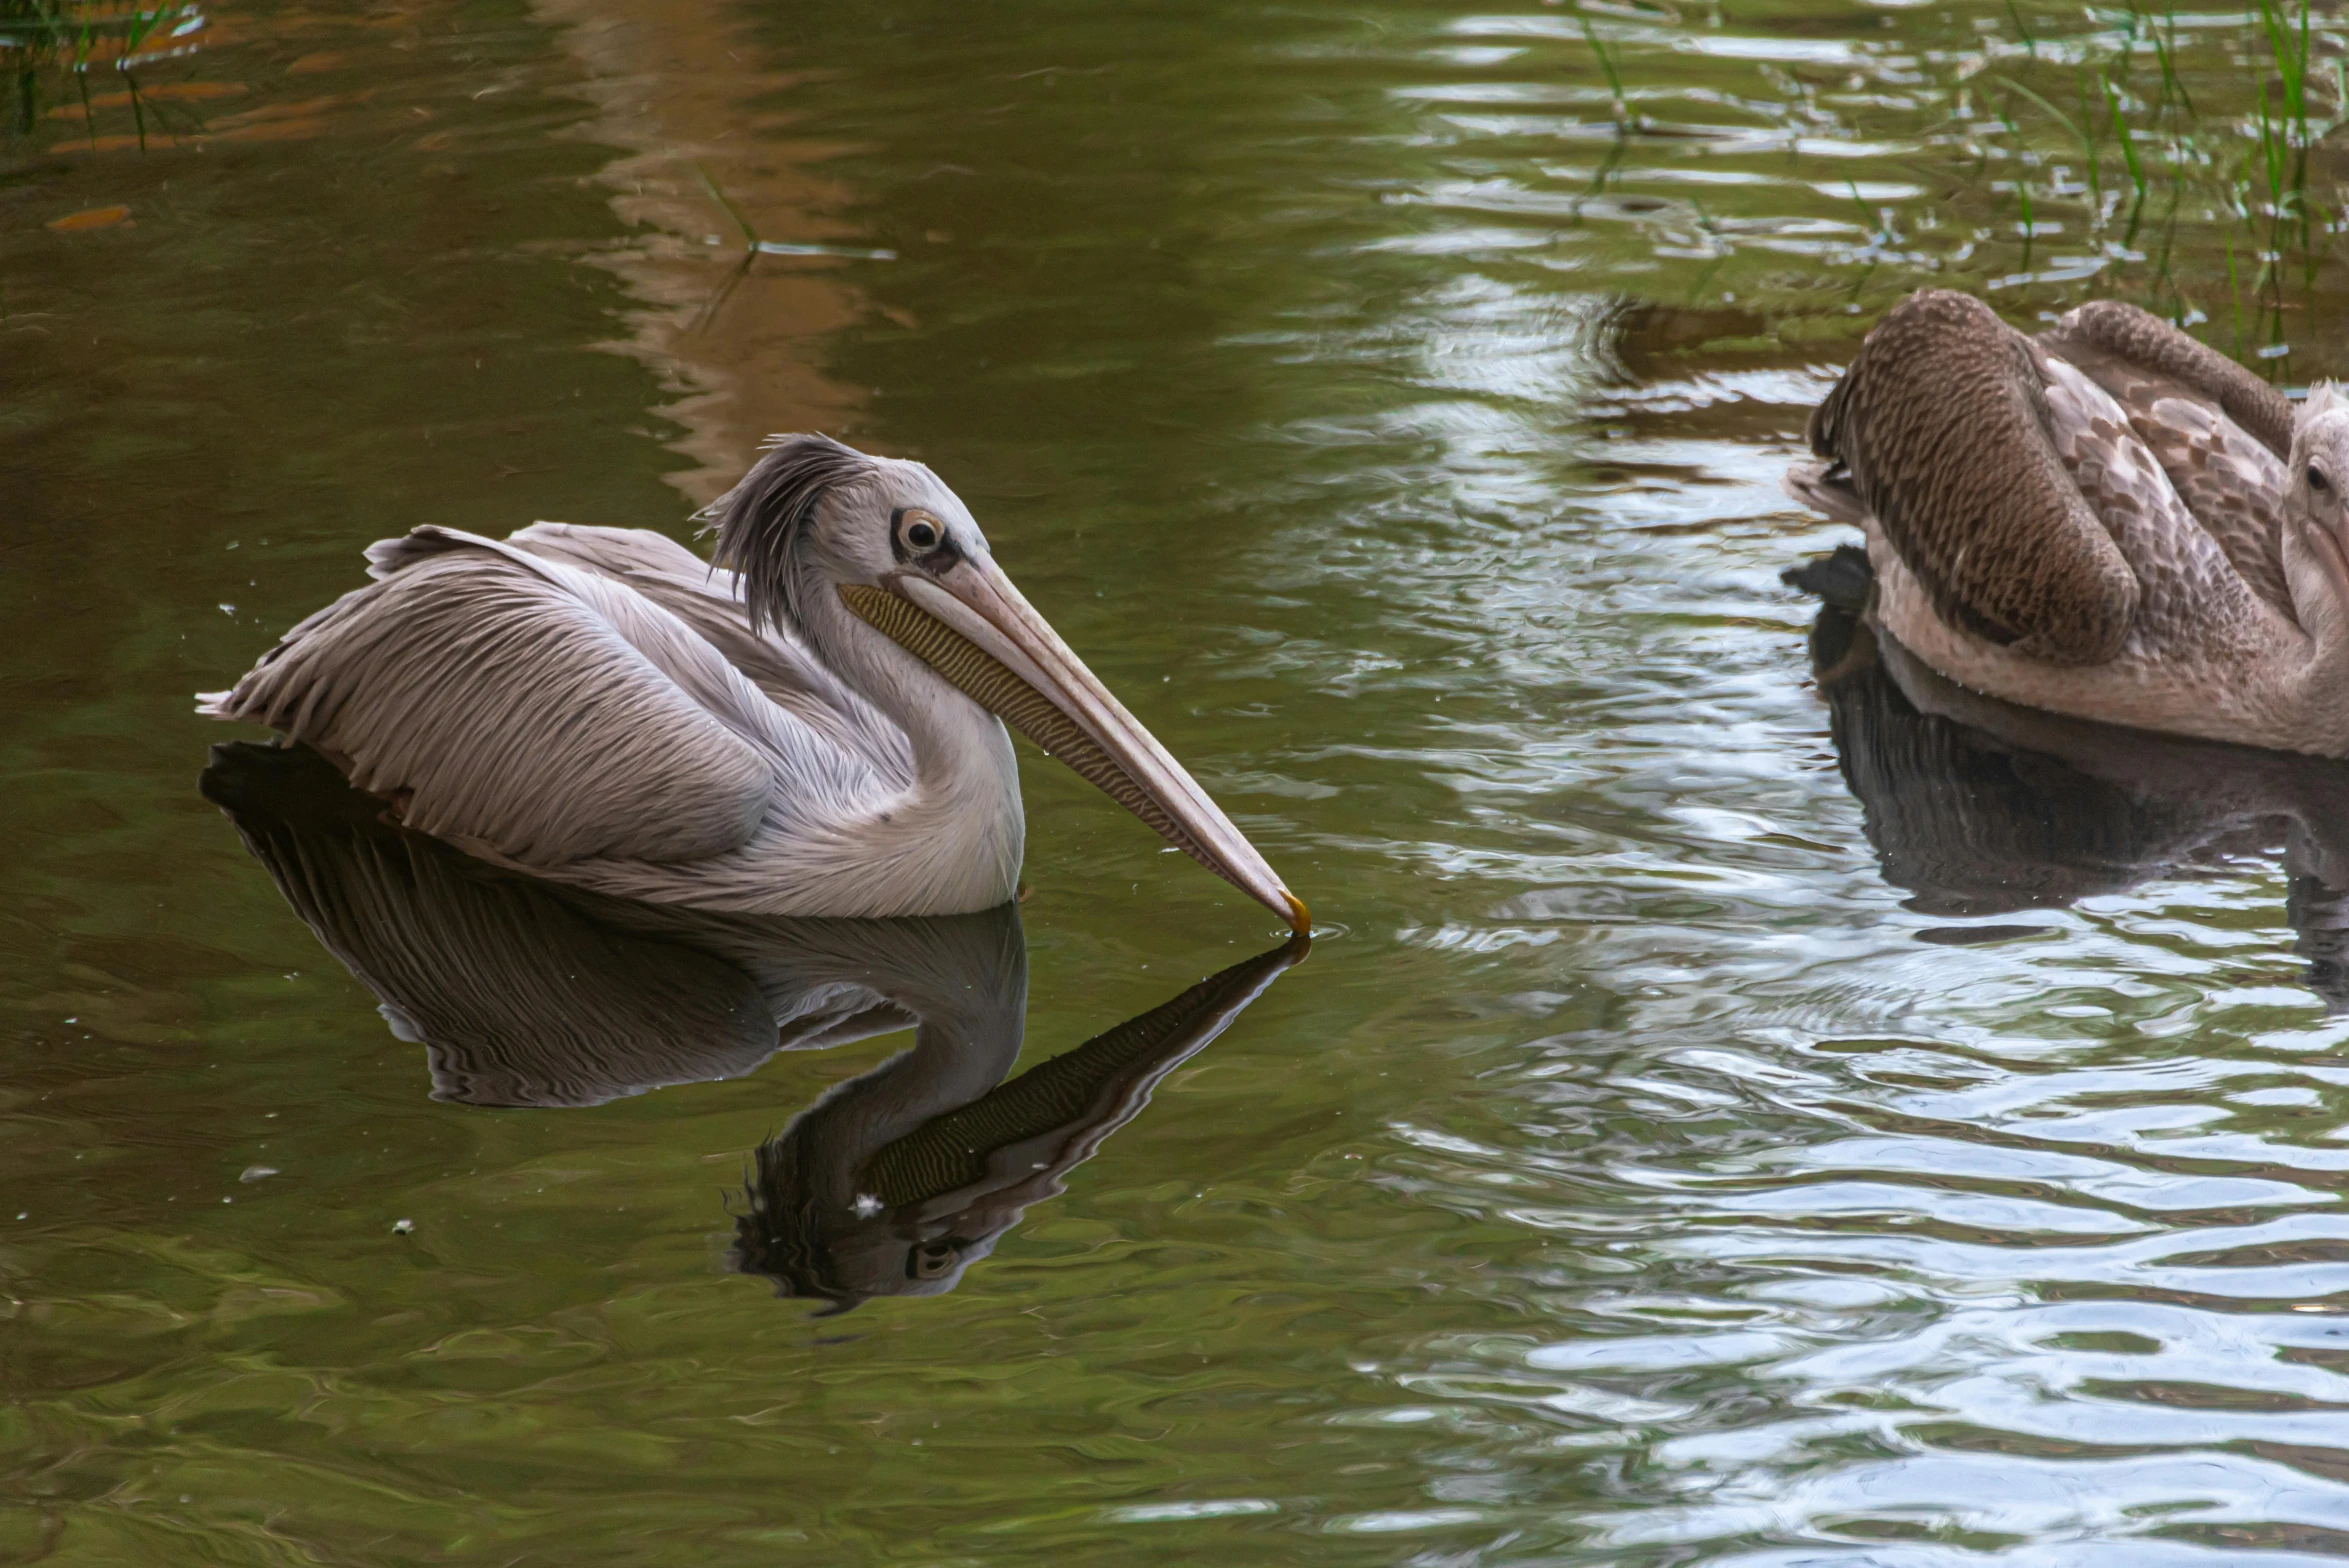 two pelicans swimming in the water near each other